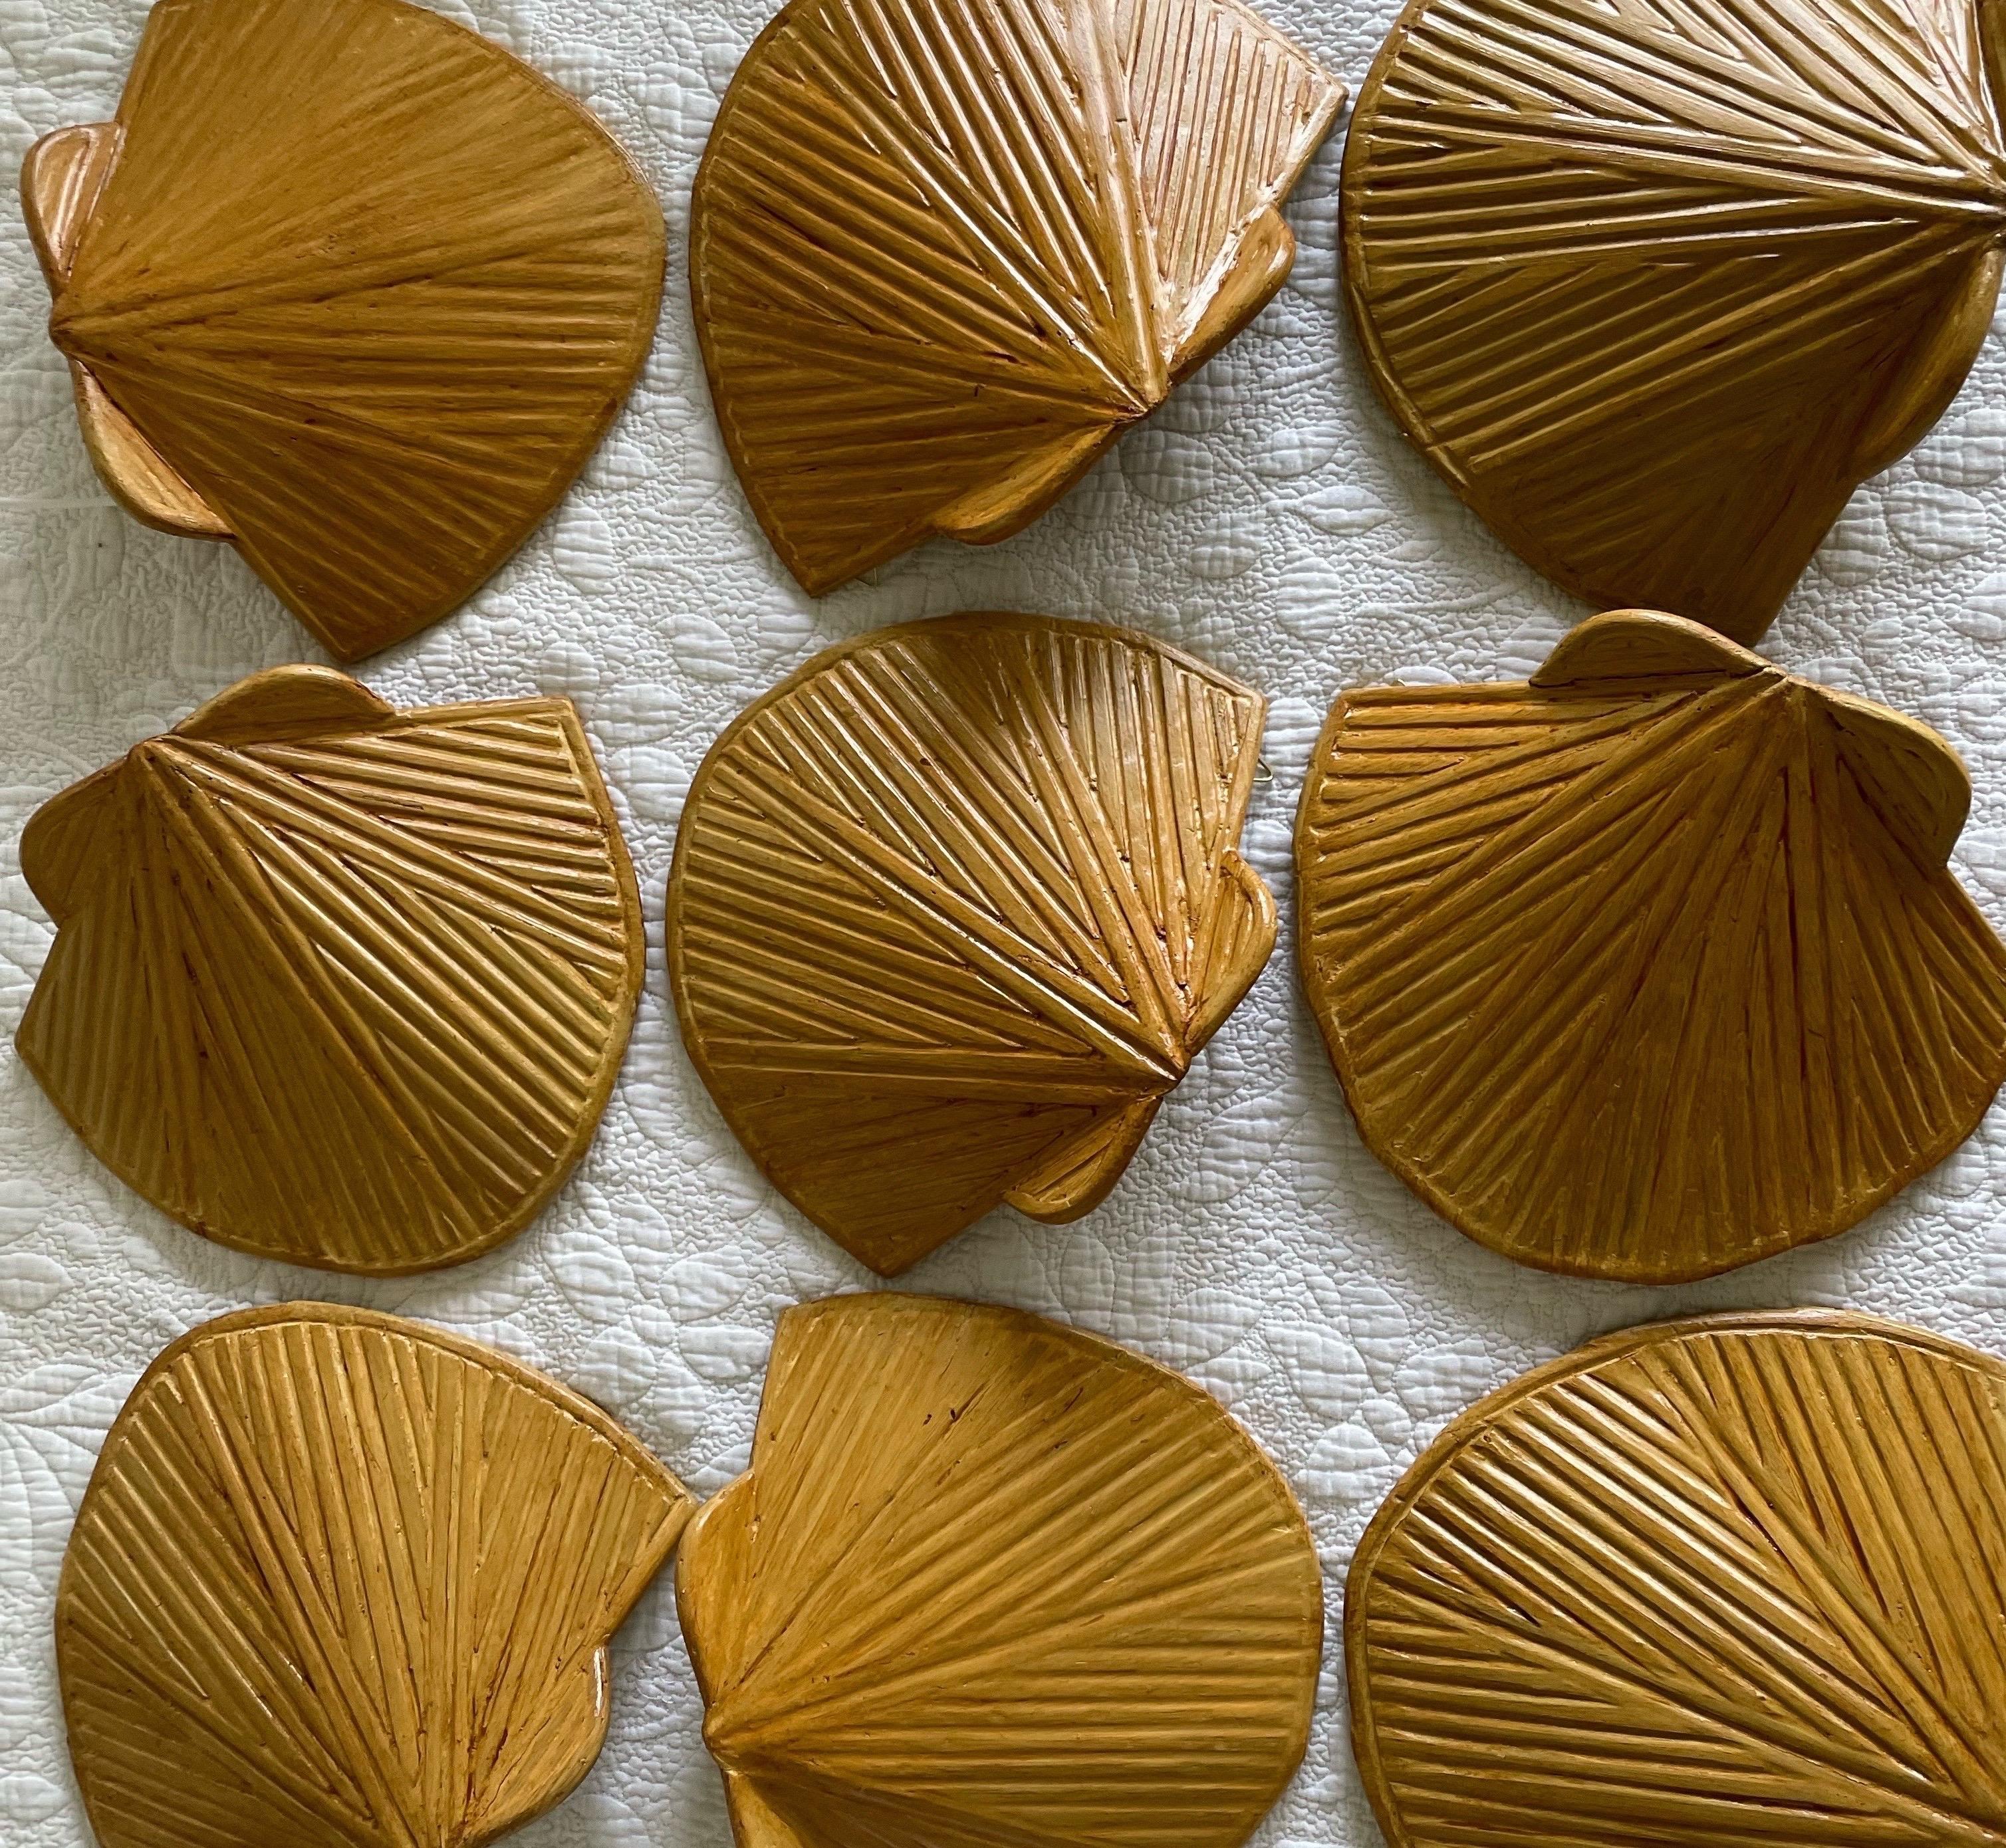 Mid-century modern shell-shaped rattan wall lamps with a French Parisian design can add a touch of elegance and style to any space. These lamps often feature a combination of rattan material, which provides a natural and organic feel, and a unique